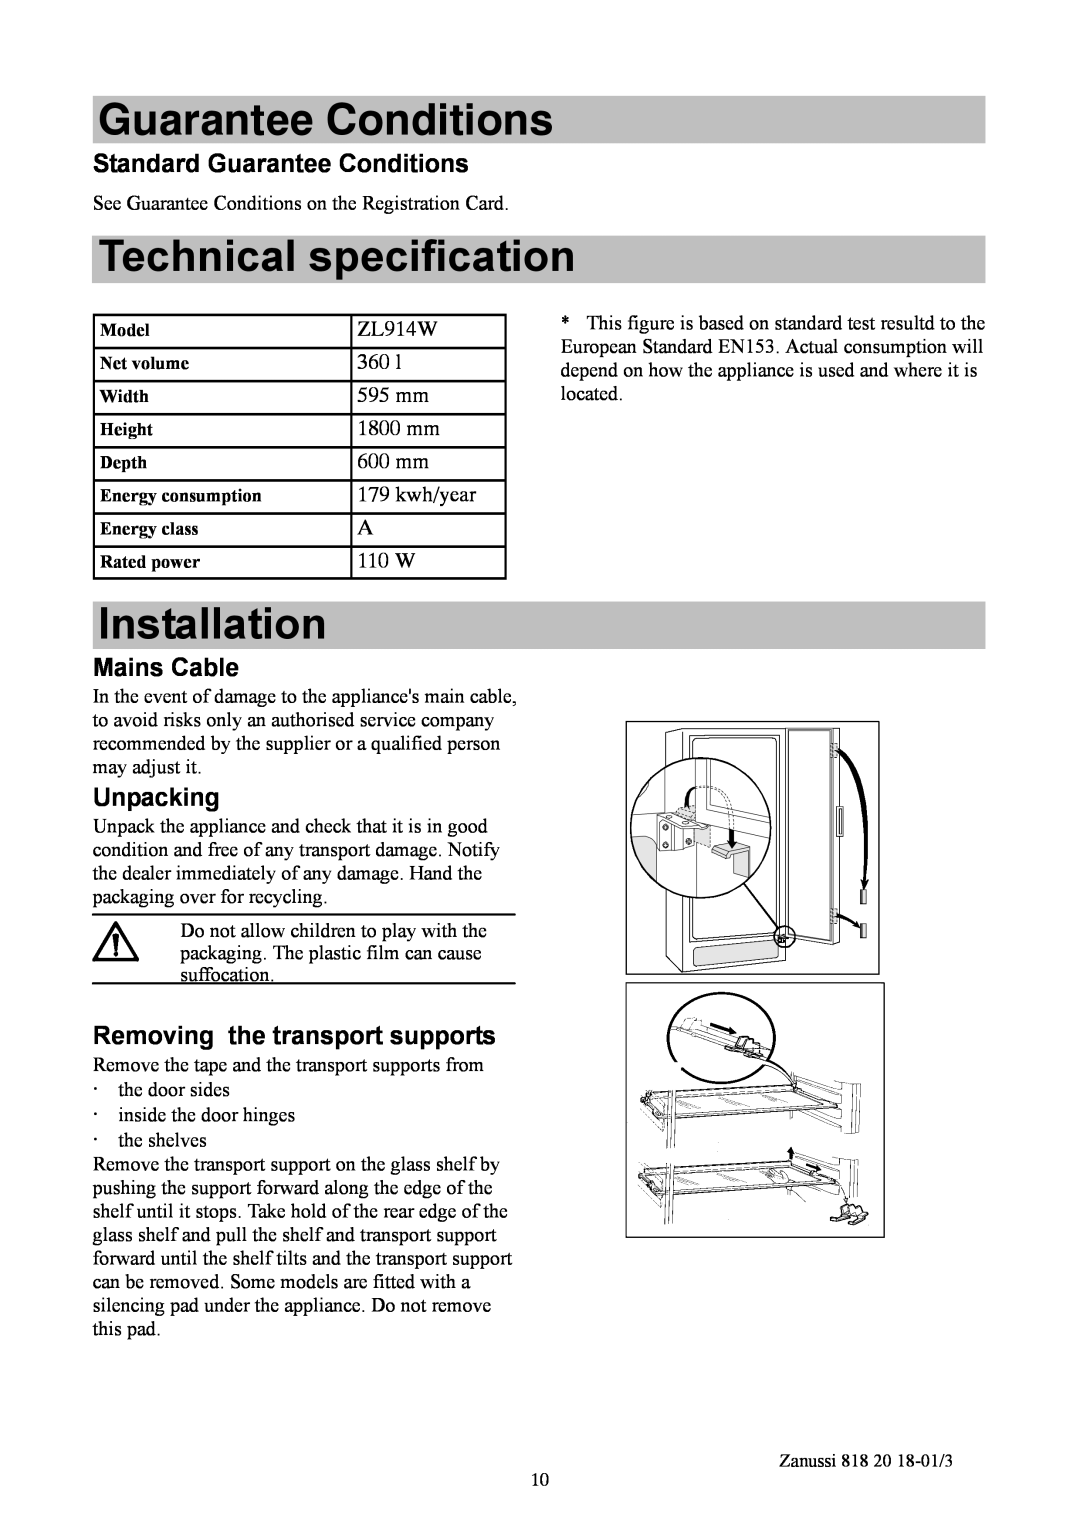 Zanussi ZL914W Technical specification, Installation, Standard Guarantee Conditions, Mains Cable, Unpacking, 360 l 